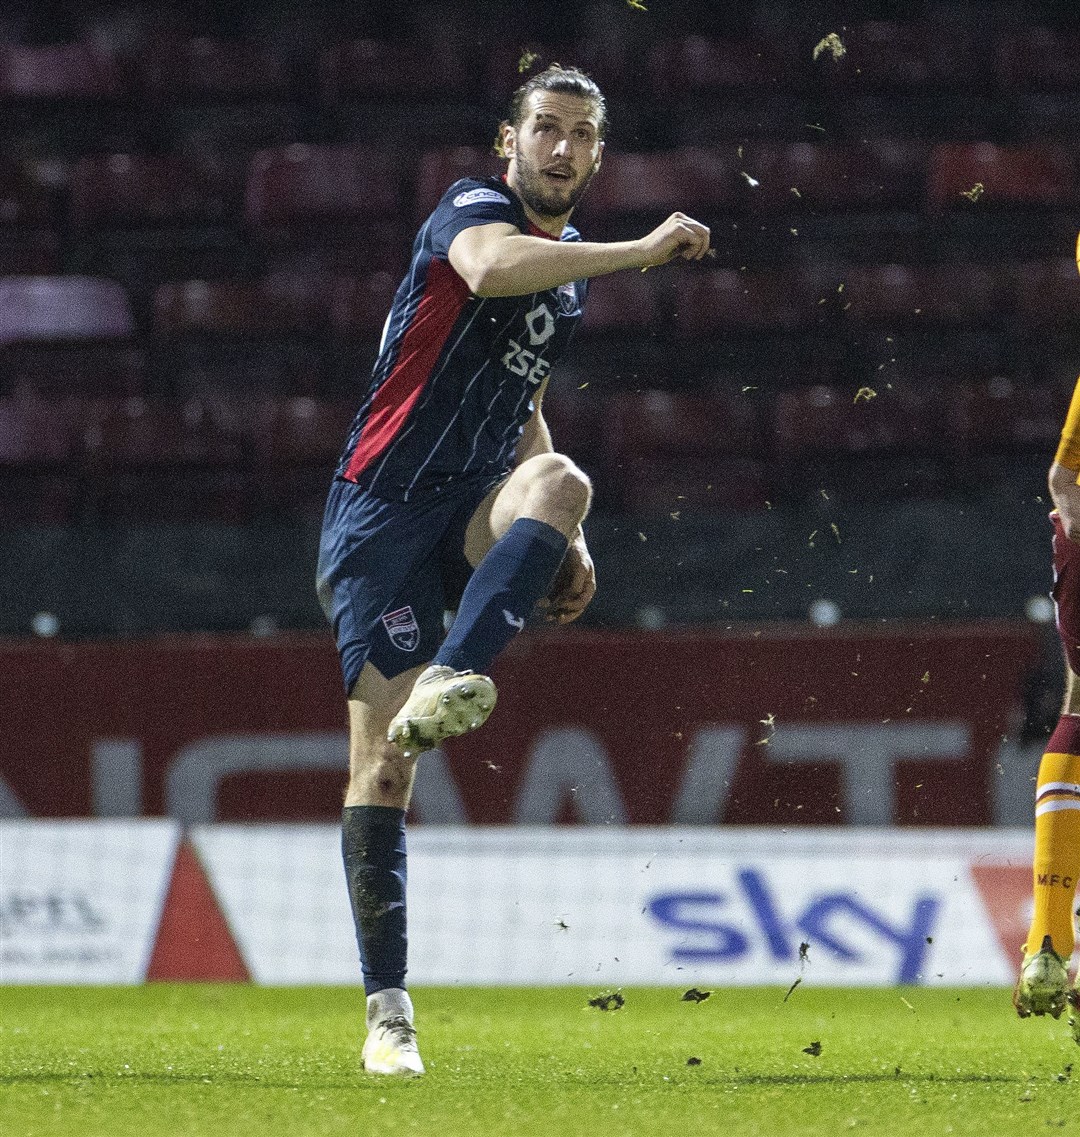 Picture - Ken Macpherson. Motherwell(0)v Ross County(1). 02.03.22. Ross County's Alex Iacovitti.